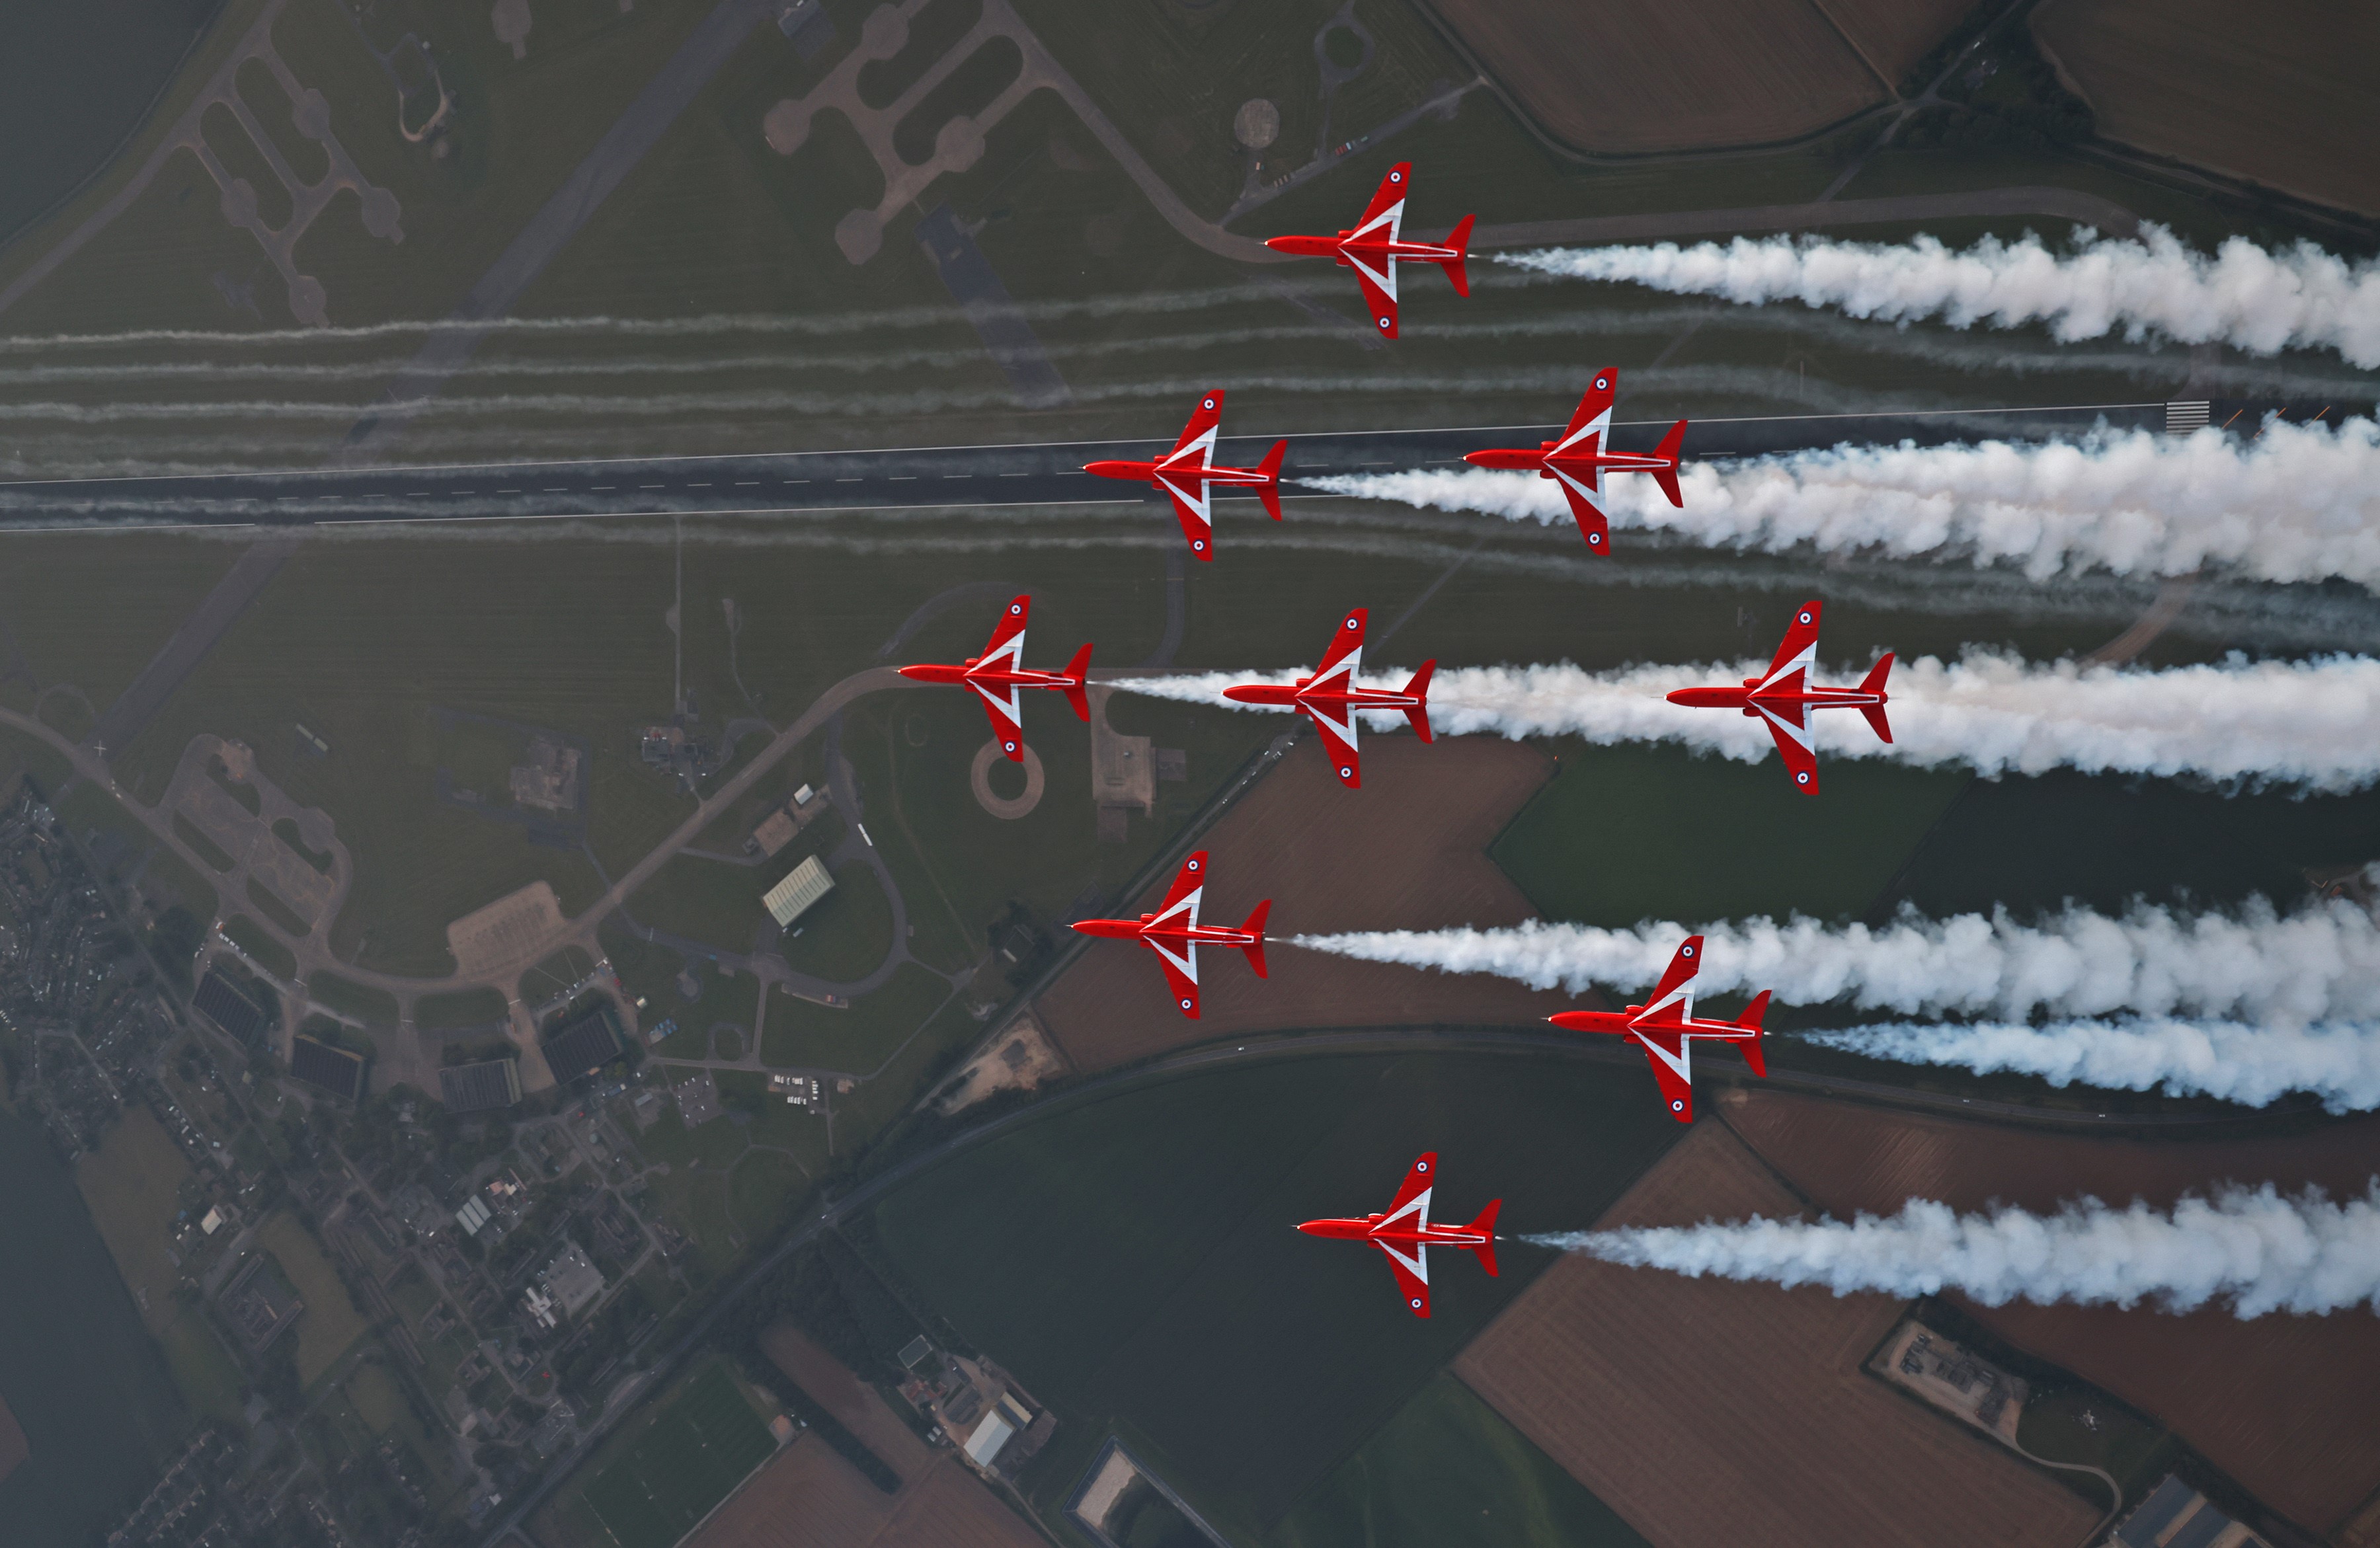 Flying the team's photographers, to get stunning aerial imagery, is a crucial role for Red 10.